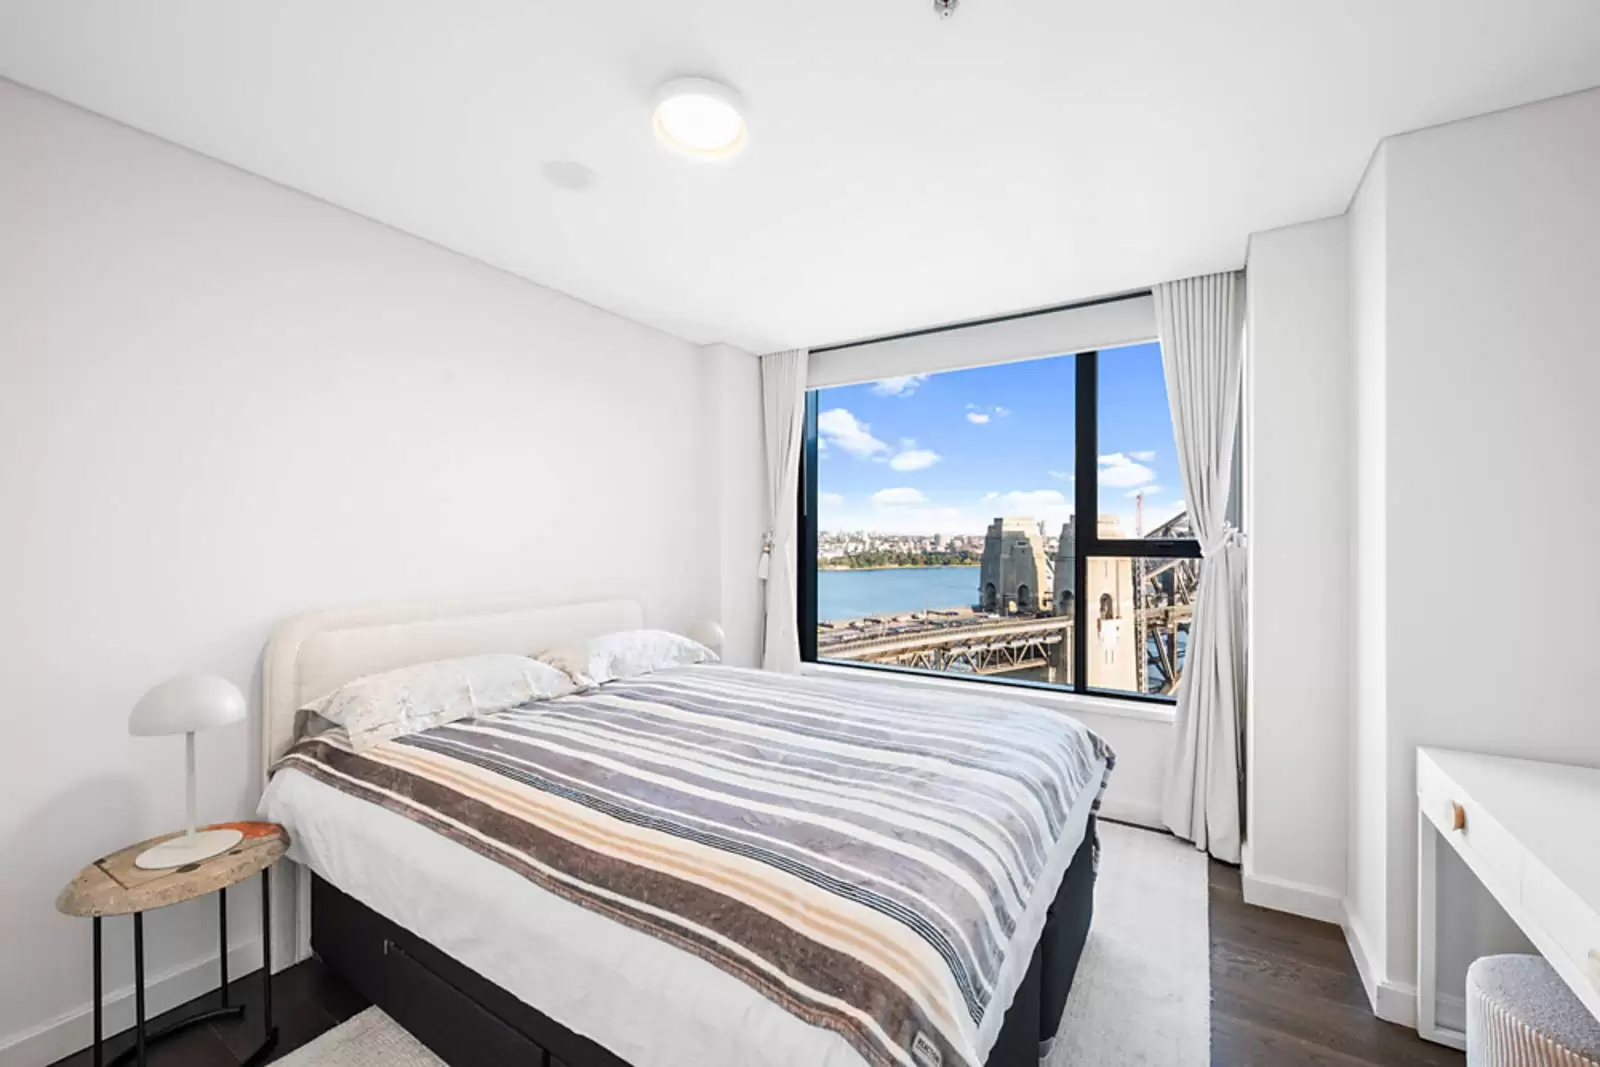 Photo #10: 1906/2 Dind Street, Milsons Point - Leased by Sydney Sotheby's International Realty